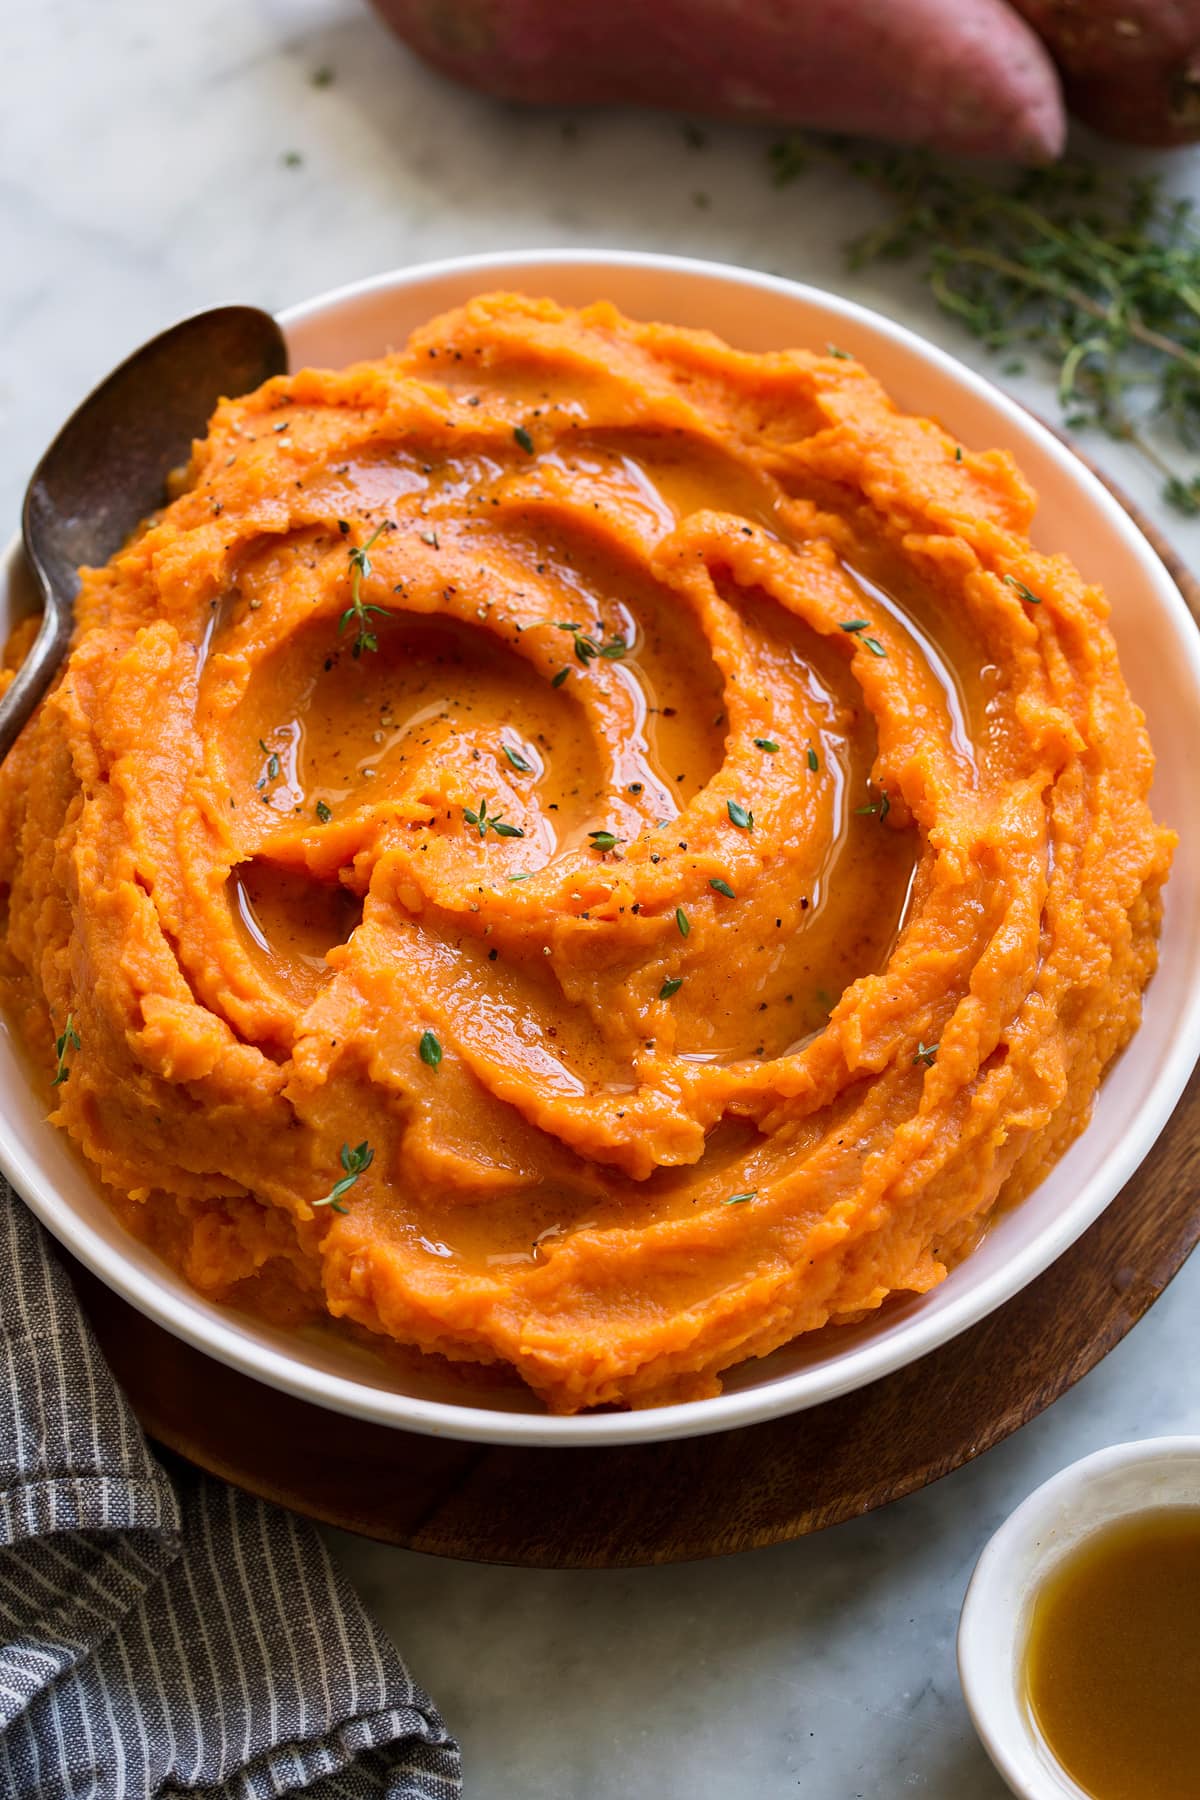 Image of bowl full of mashed sweet potatoes with melted butter on top.